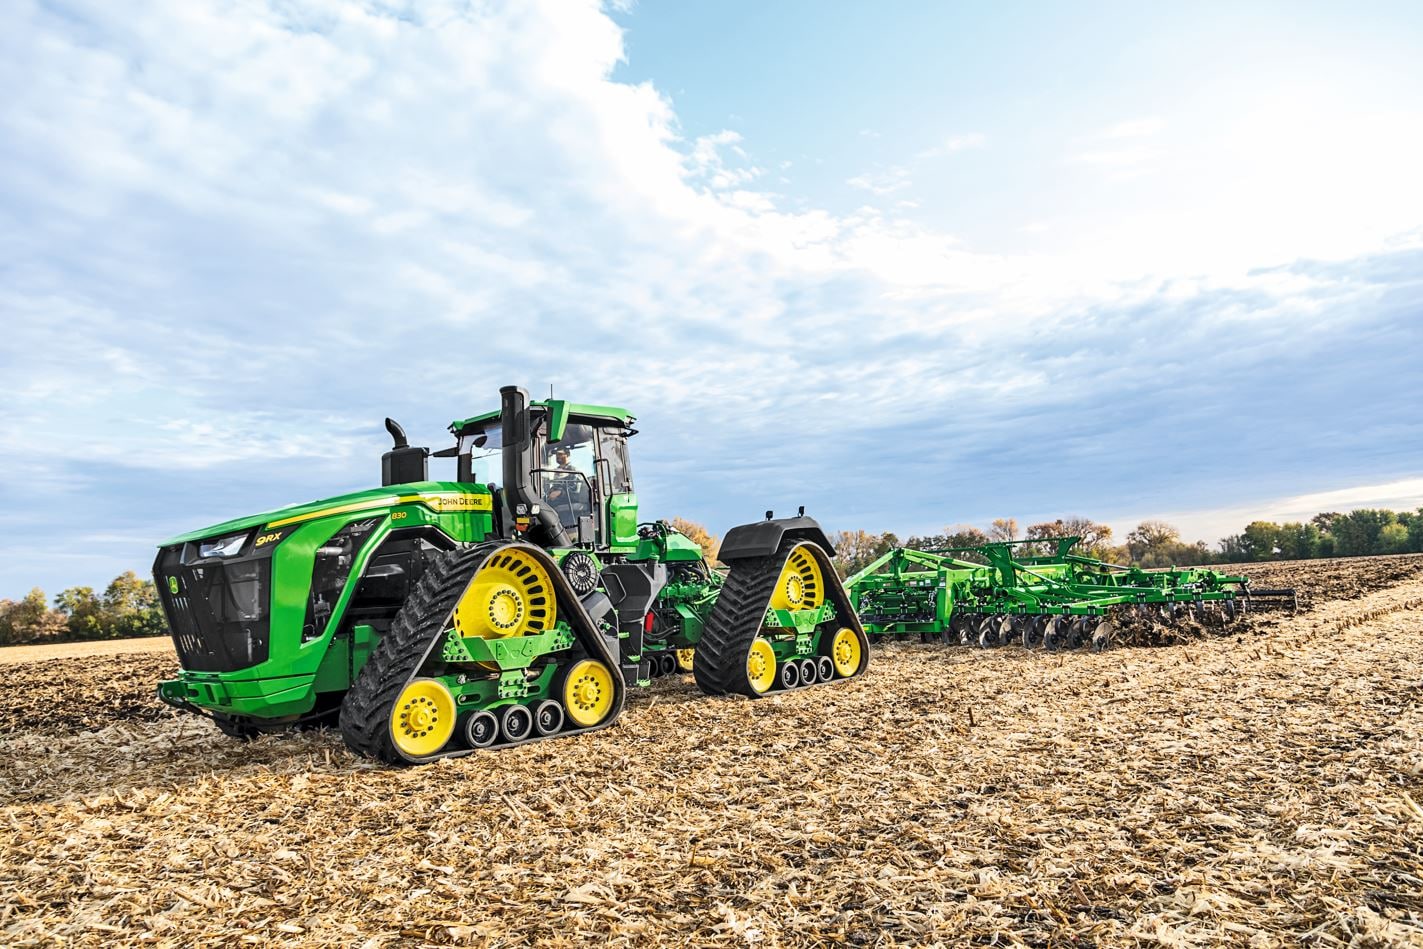 John Deere takes 9RX tractor to new dimension with three all-new models